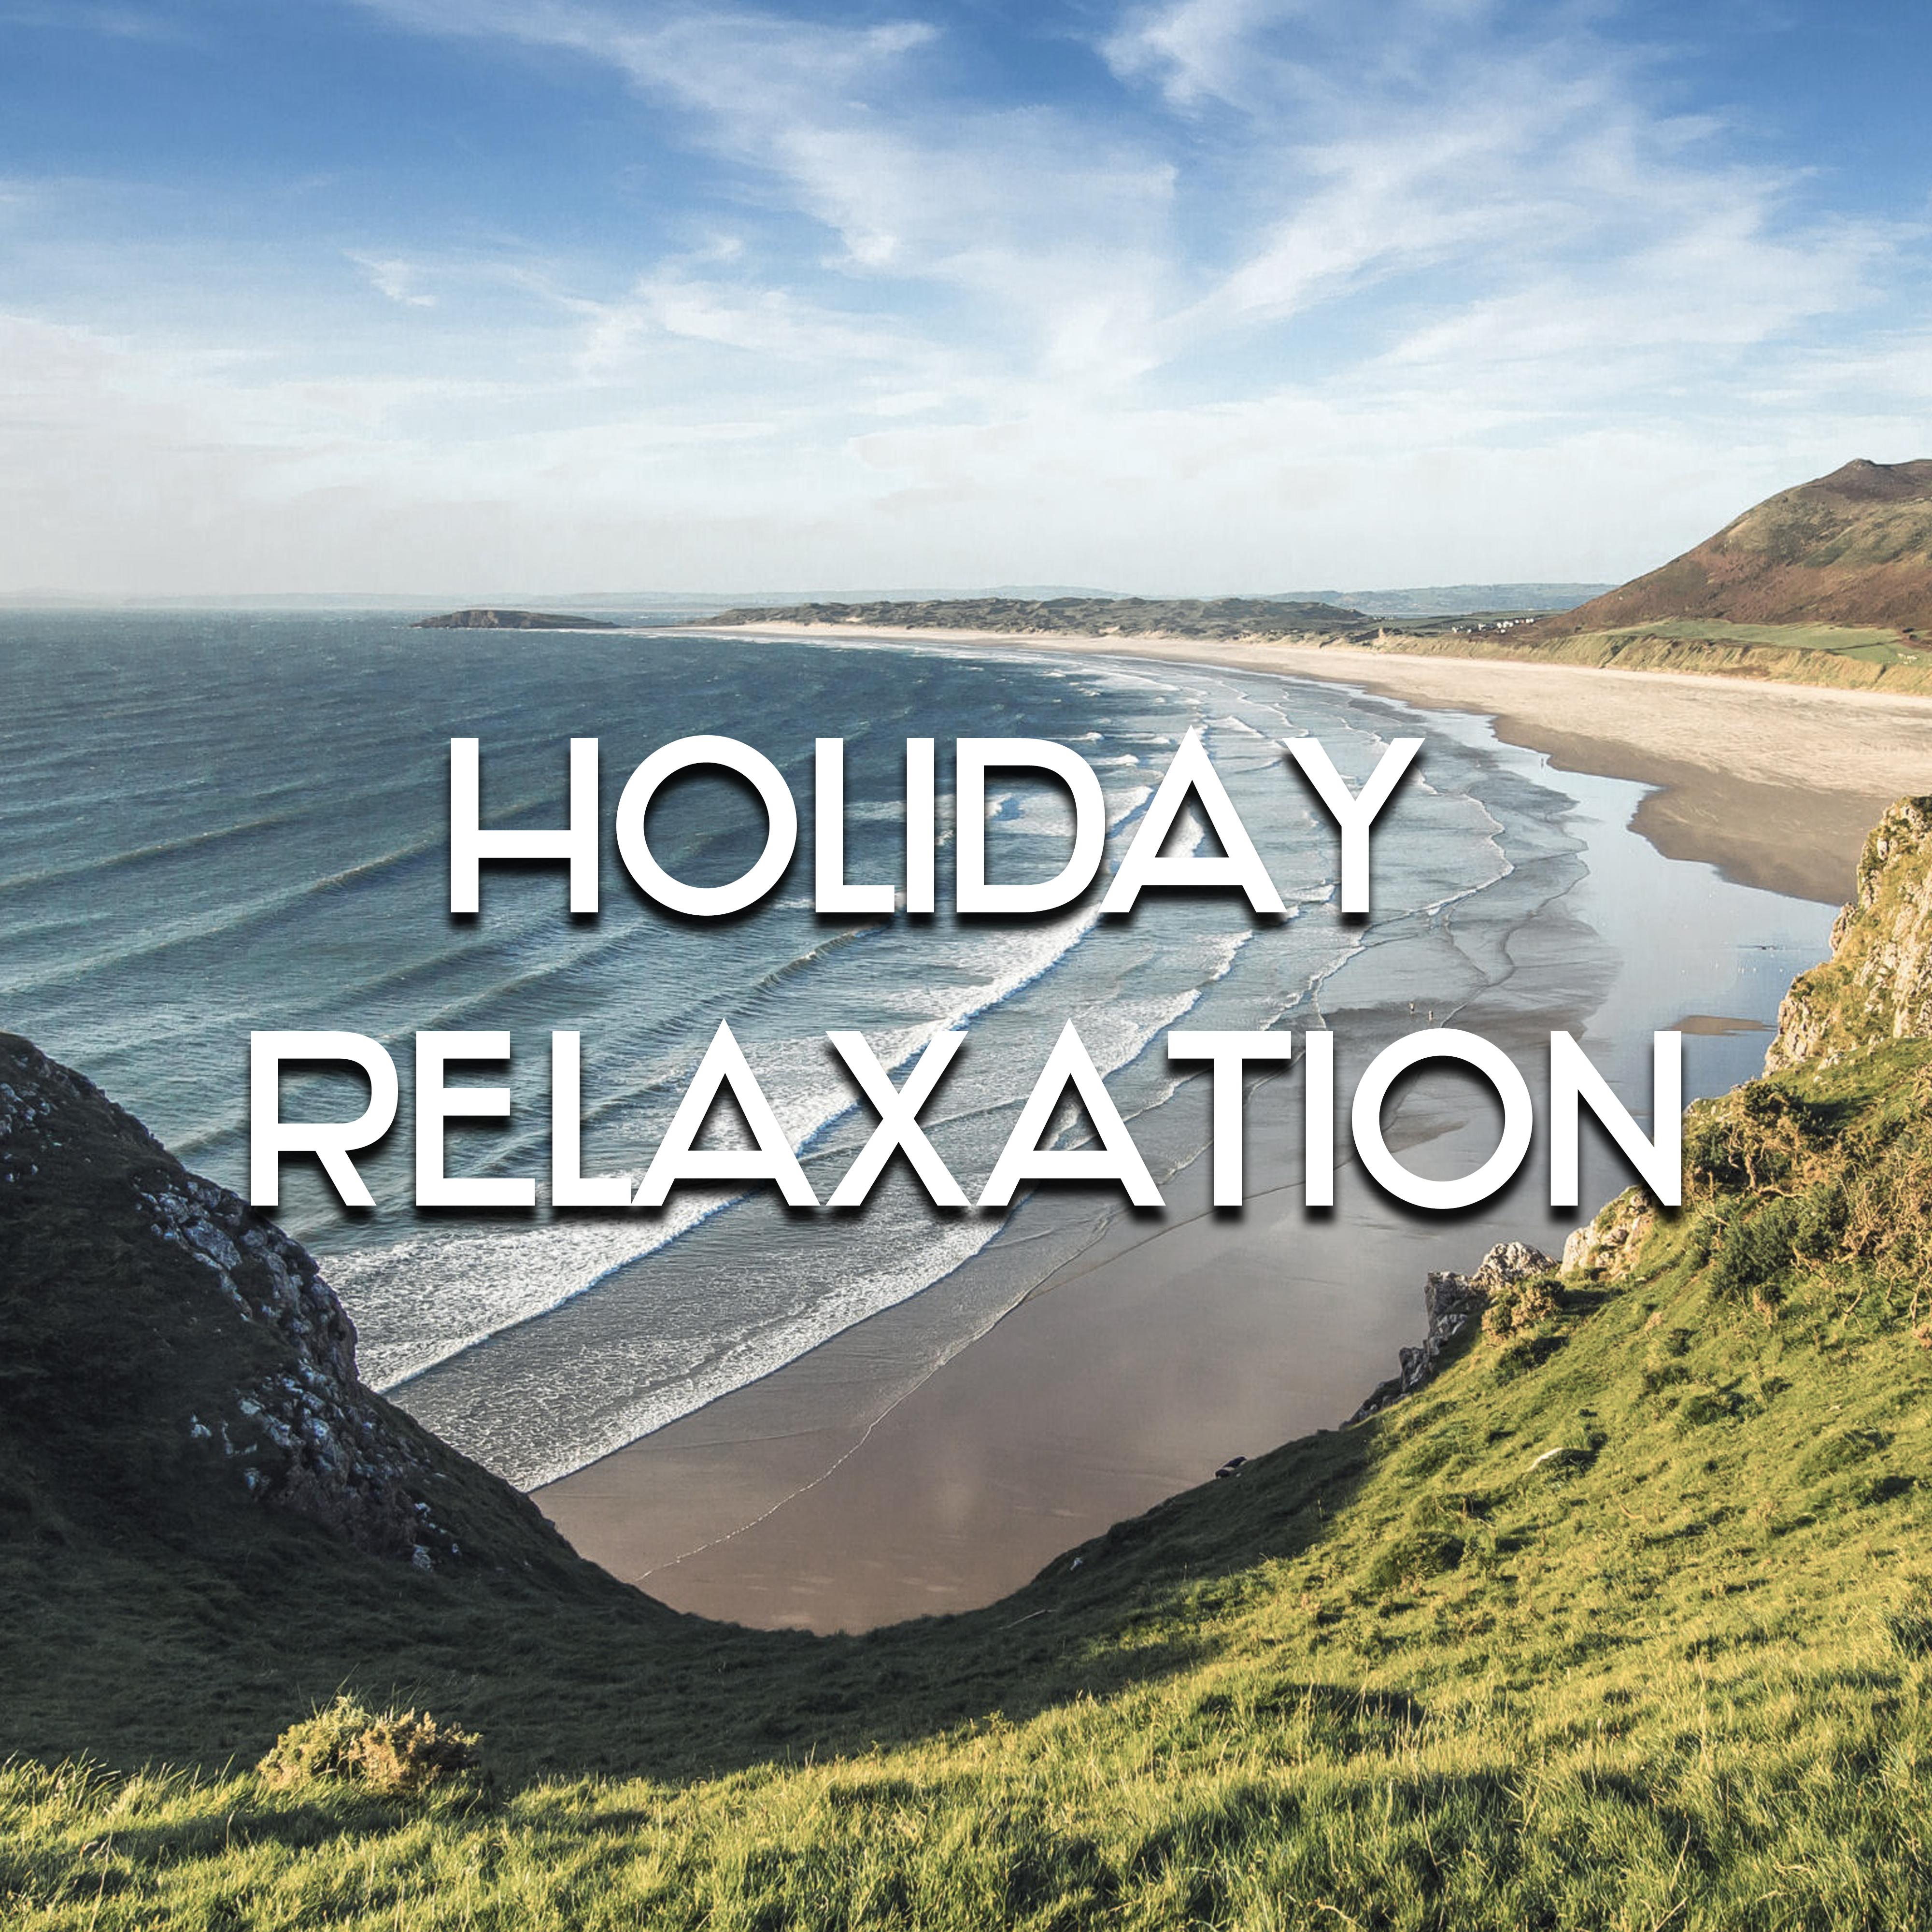 Holiday Relaxation – Calm Chill Out Music, Rest on the Beach, Summer Time Chill, Clear Mind